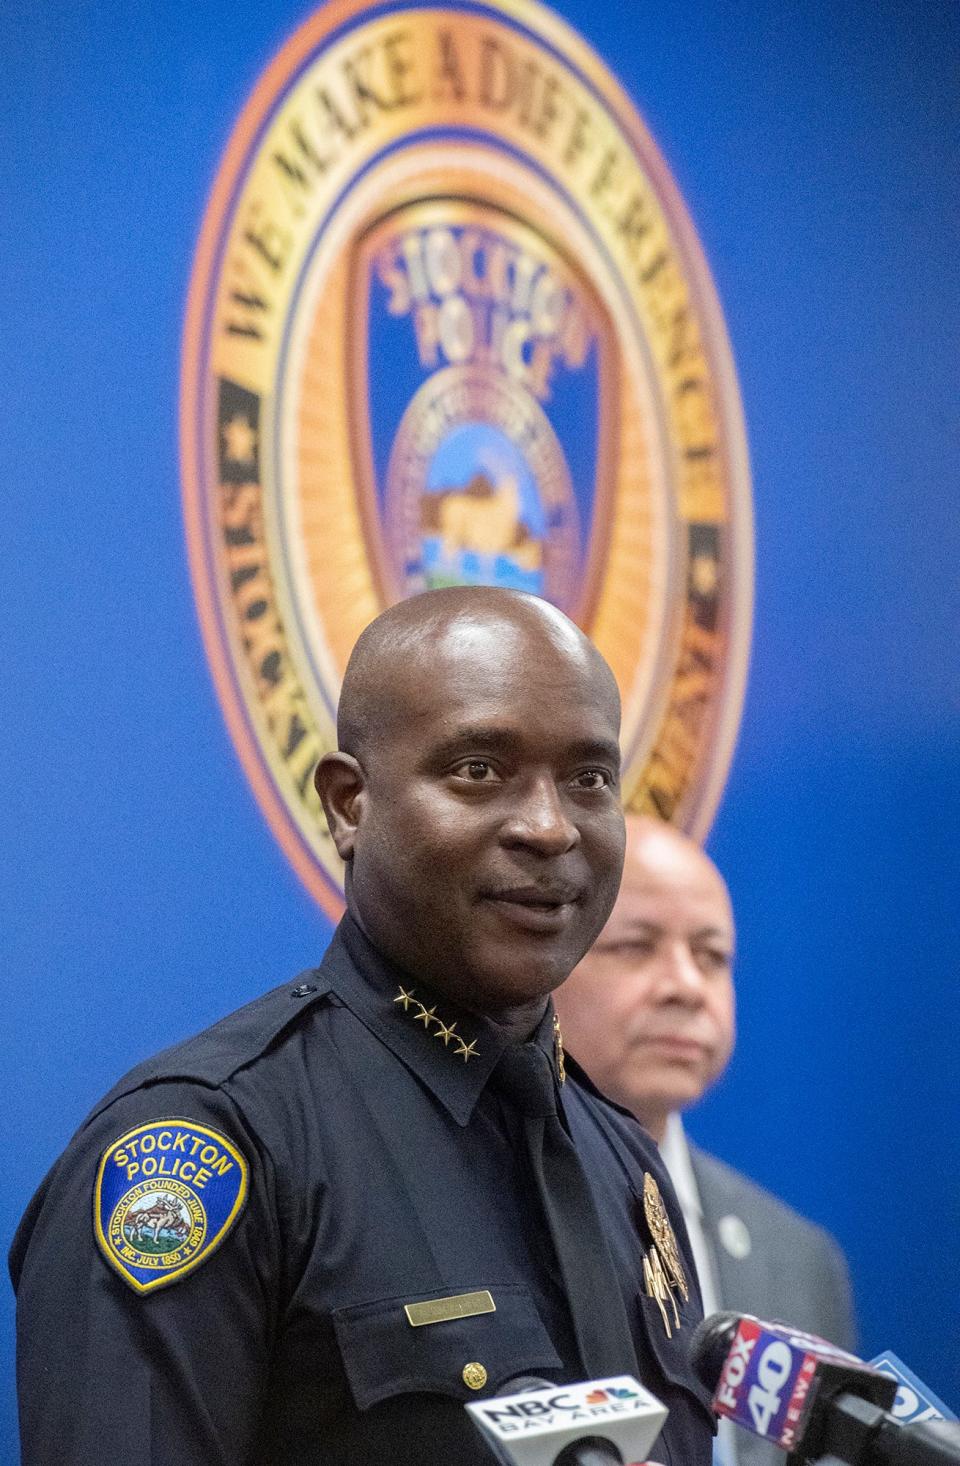 Stockton Police Chief Stanley McFadden speaks at a news conference at the Stockton Police department about a possible serial killer in Stockton.